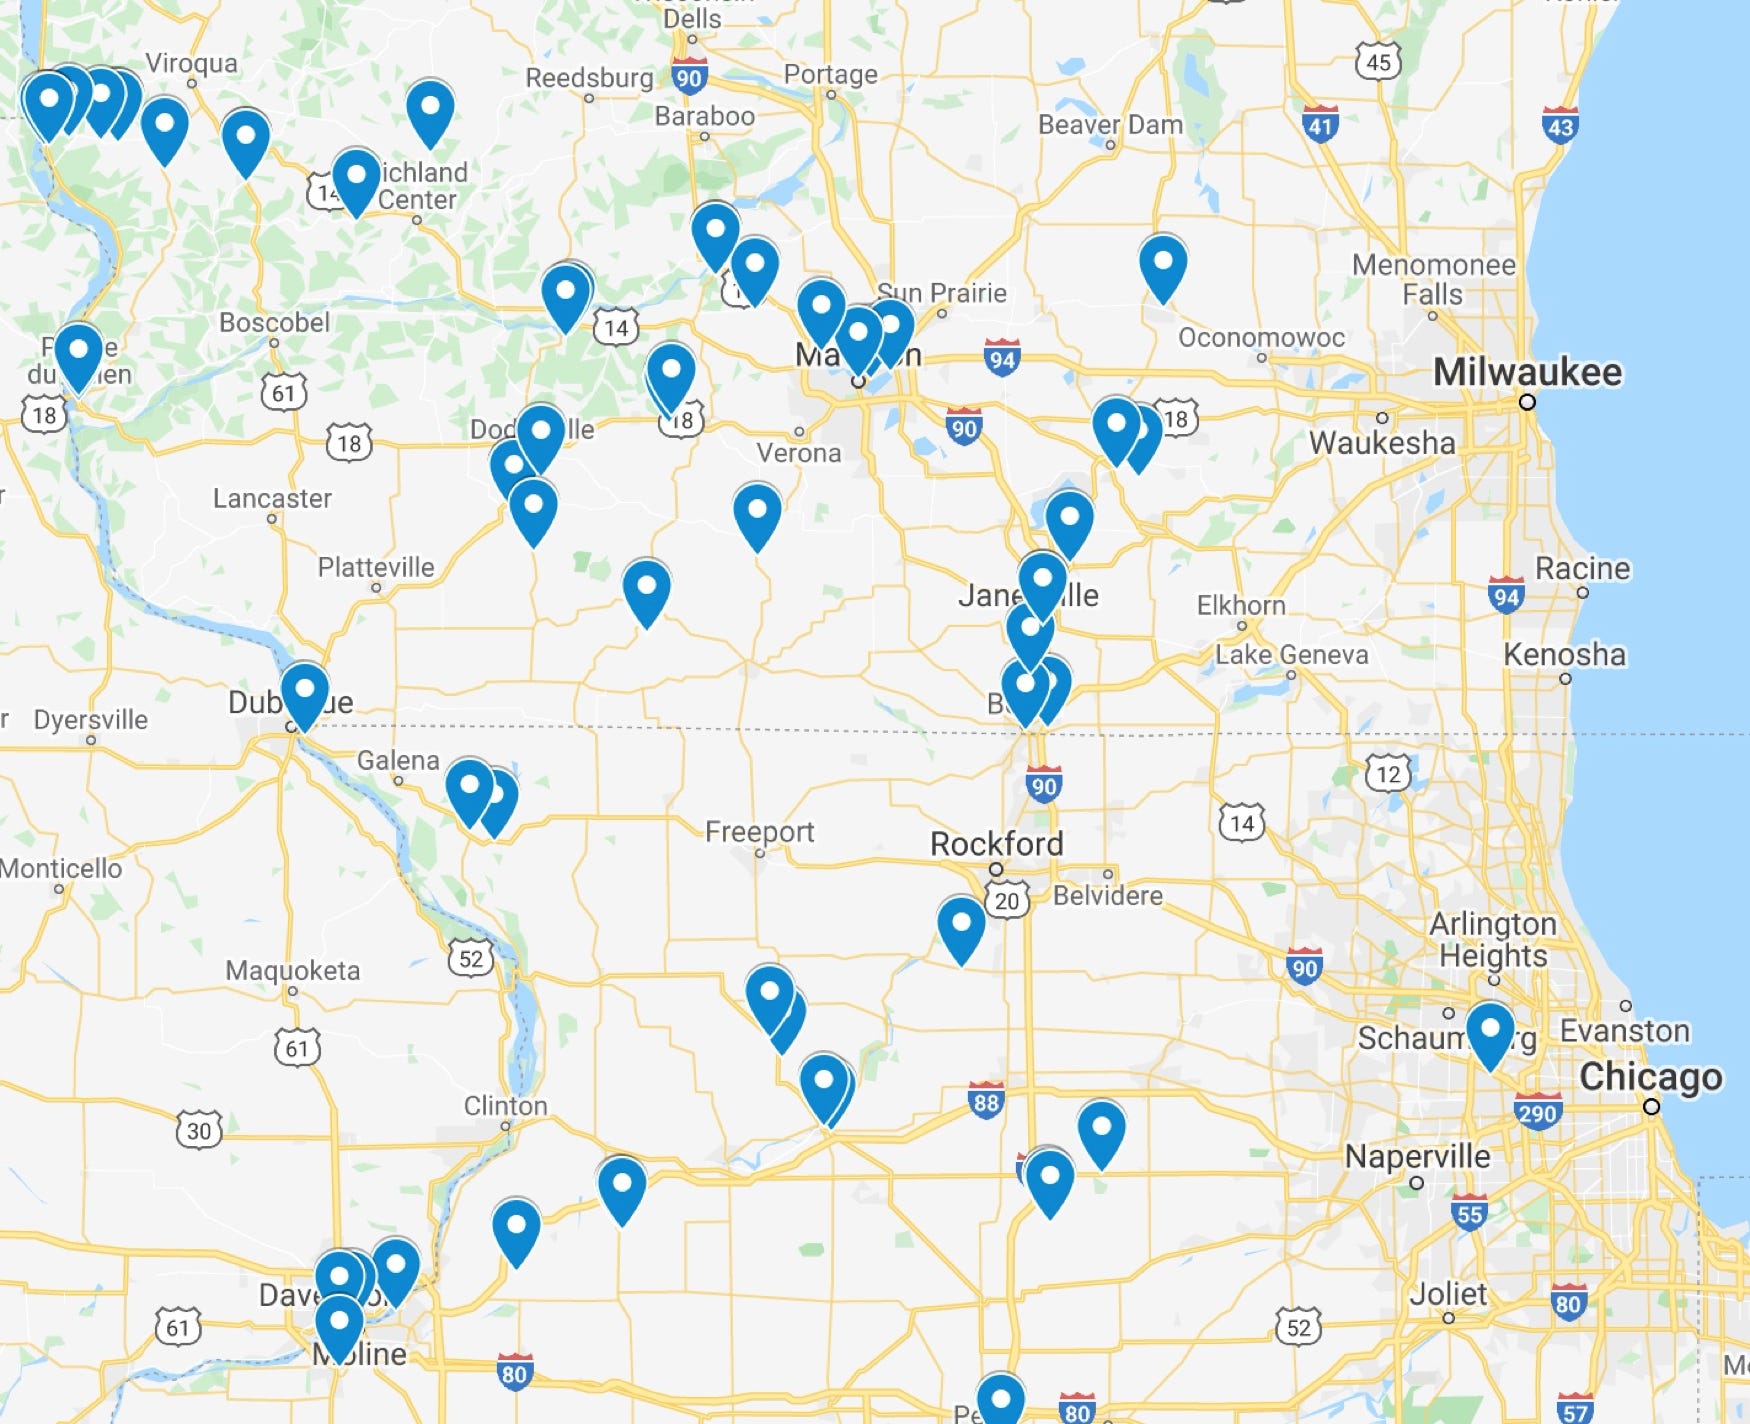 Over sixty historic markers on this Google Map from Wisconsin, Iowa, Illinois and Kansas, mark sites associated with the Black Hawk War of 1832.  Compiled by Ben Strand in 2021.